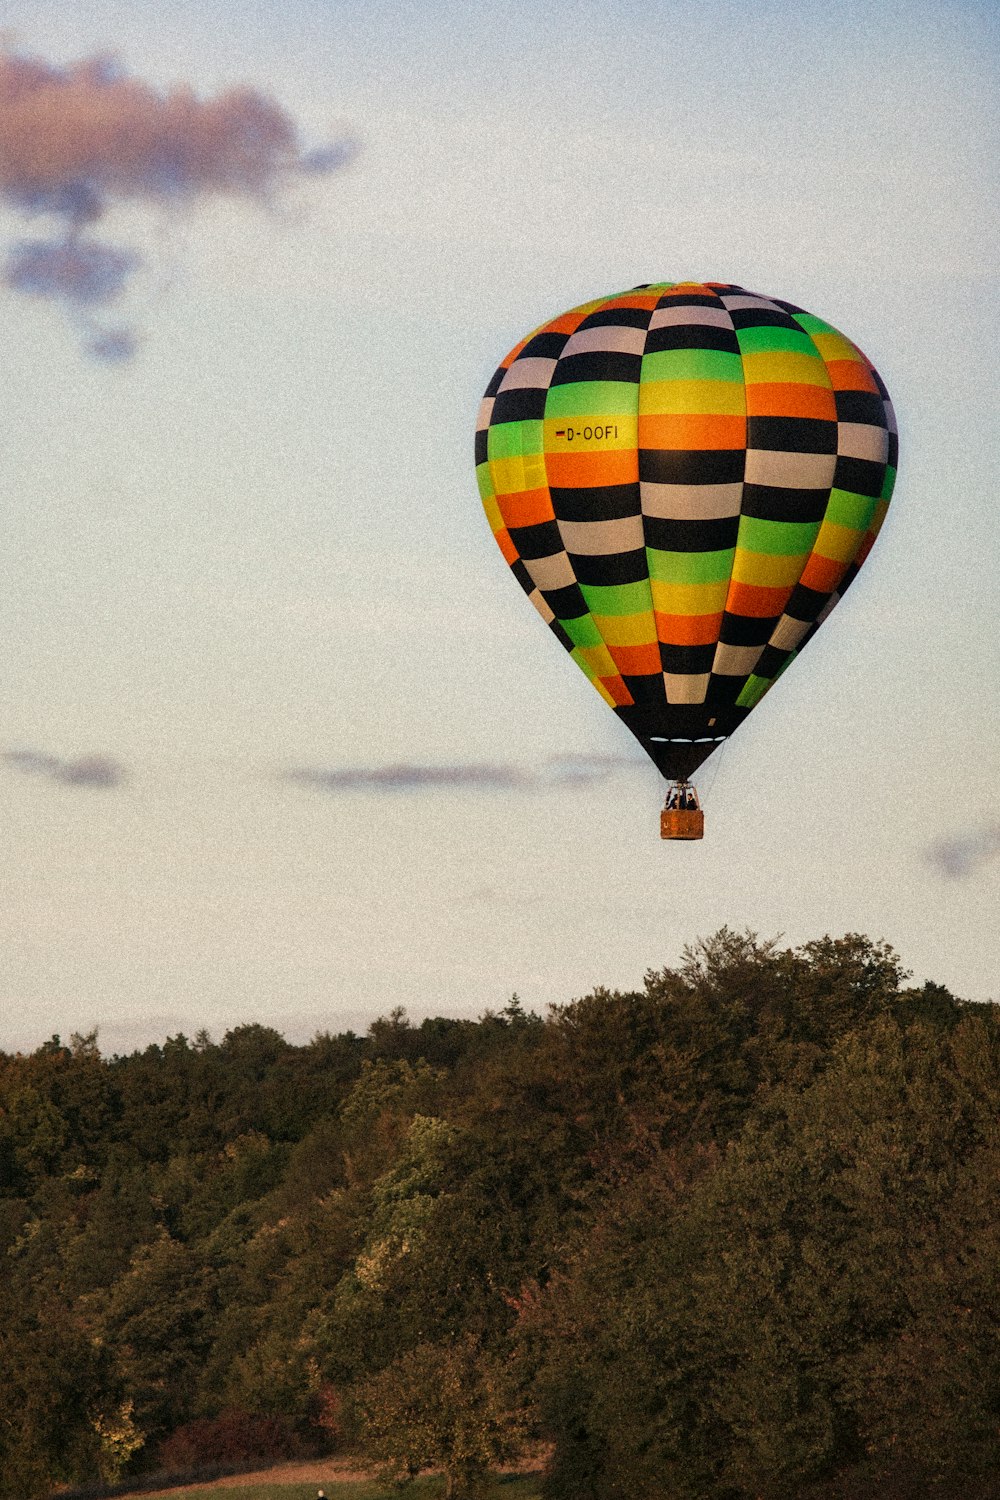 yellow red and blue hot air balloon on mid air during daytime